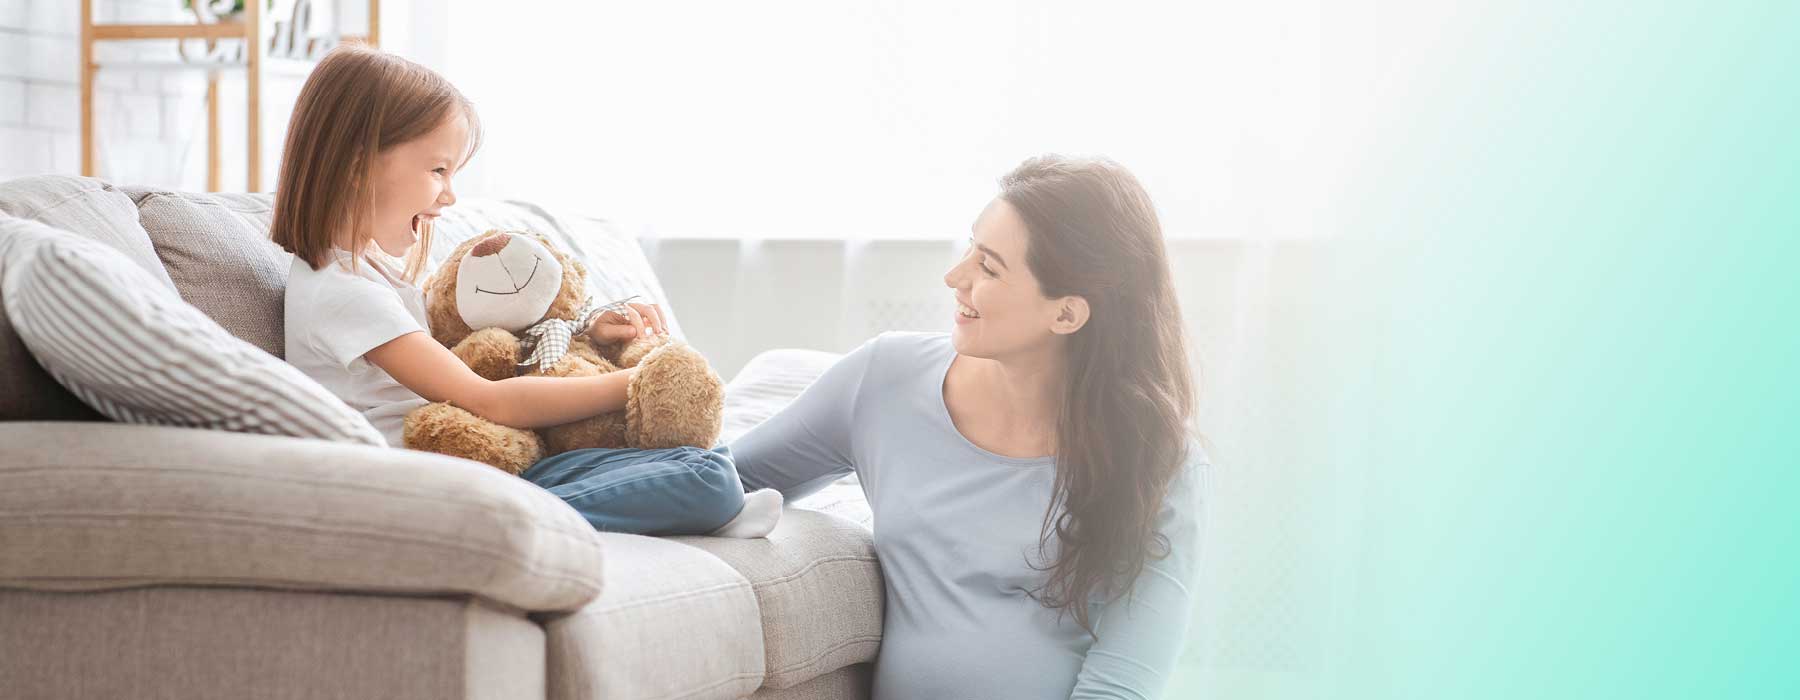 Woman with young child on sofa clutching her soft toy. Using Colloidal Silver around the home.